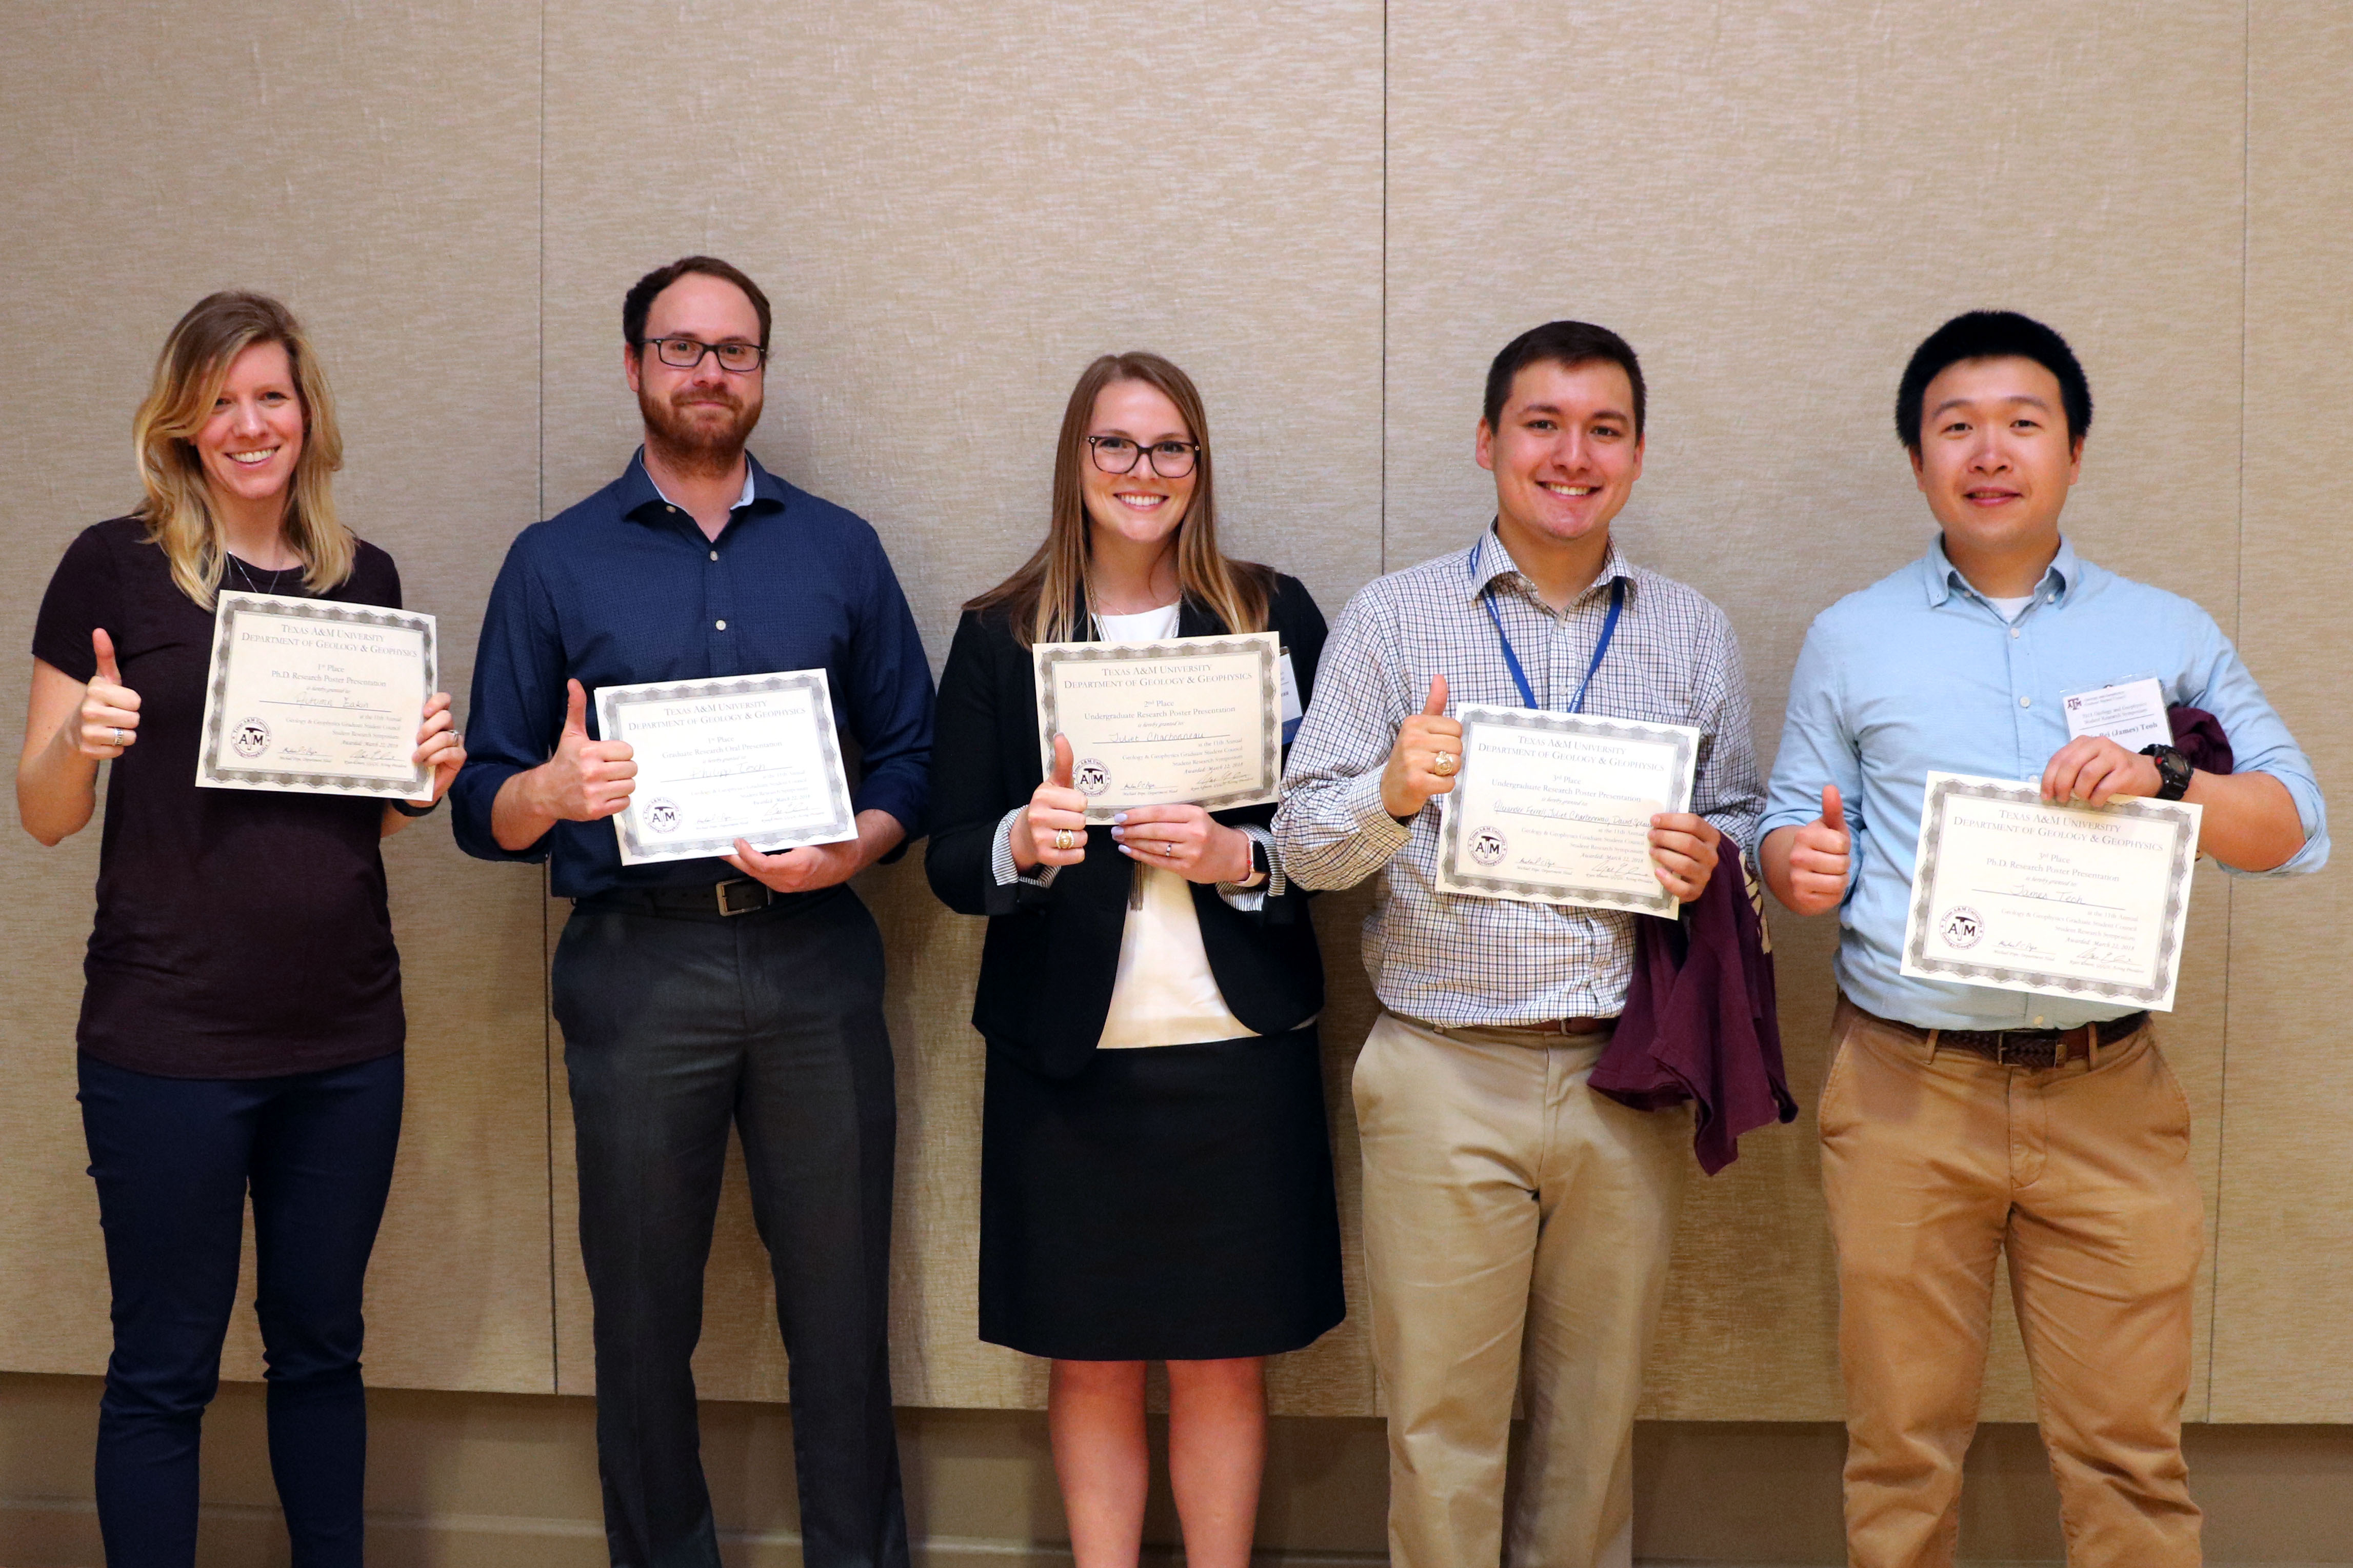 Congratulations to the Geology & Geophysics Student Winners at the 2018 GGGSC Research Symposium